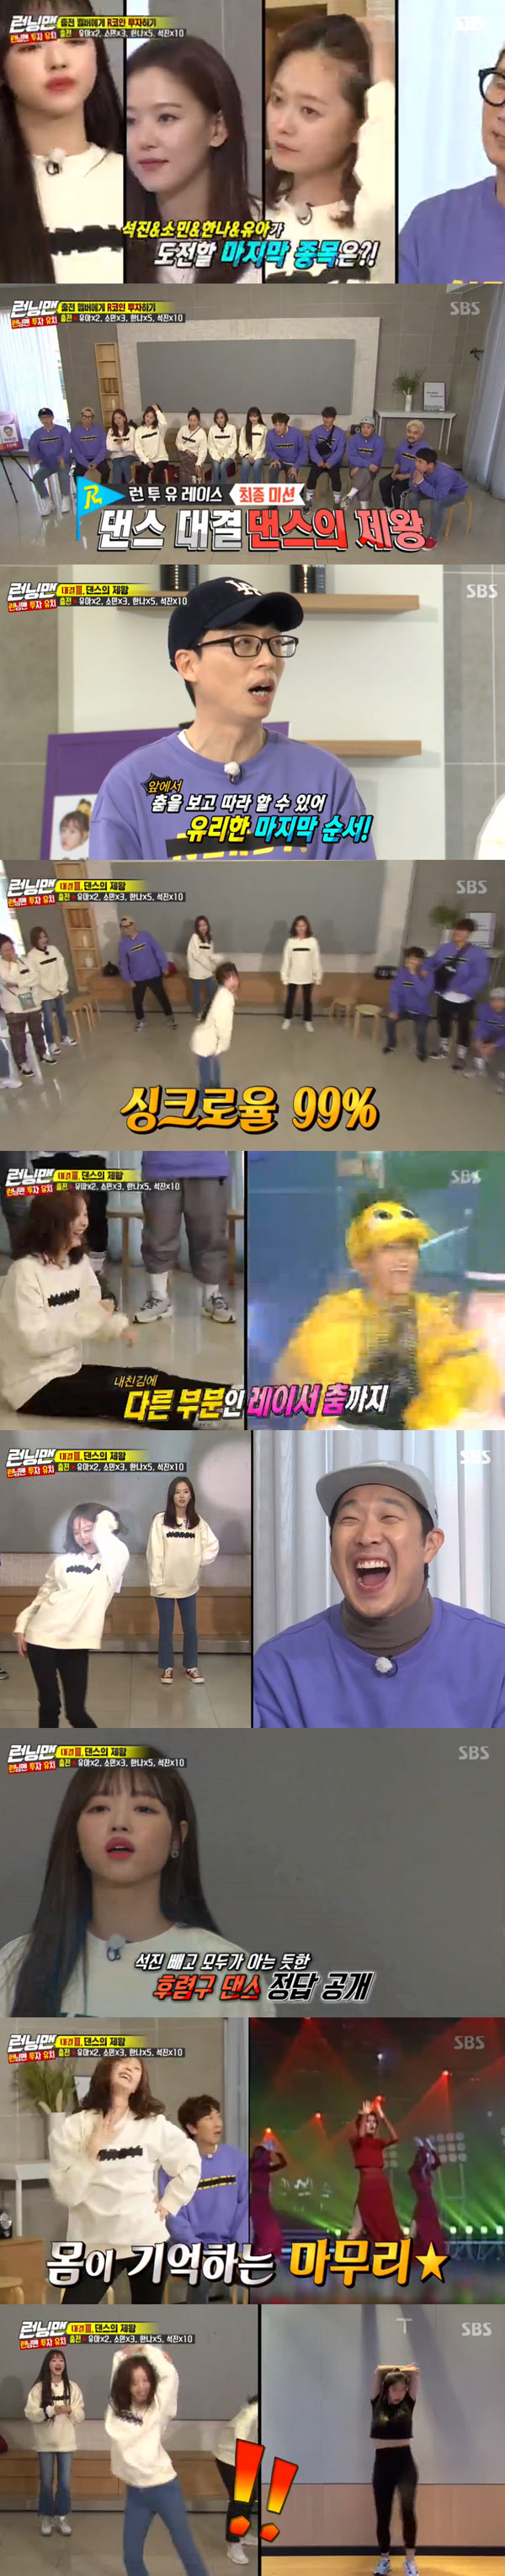 Lee Hee-Jin performs Water bomb penalty in first appearance of Running ManOn SBS Running Man broadcasted on the 8th, Running Man Investment Attract Race was held, and actors Kang Han-Na, Lee Hee-Jin, Oh My Girl YooAAAAAA and broadcaster YooAAAAA Byung-jae appeared as guests.A total of 12 people, including guests, will be held in the mission on the day. Currently, 10 members have COIN each.The most final RCOIN members win and win the product, and the least members will receive water cannon penalties.The rules of the day are four players per event, and they will go to the third round and invest RCOIN by selecting the players.If the investor wins, he or she will acquire RCOIN as much as dividend, and if he or she loses, all RCOIN will disappear.The first rule was to survey 100 citizens who seemed to be the best at what events.If you invest in Kim Jong-kook, you will get twice as much COIN, YooAAAAA Byung-jae will get three times, Lee Kwang-soo will get five times, and Haha will get 10 times more COIN.The mission, which was released afterwards, was the king of the thighs of the pain-bearing confrontation, and Kim Jong-kook took first place as expected.YooAAAAAA, Song Ji-hyo, Yang Se-chan and Jeon So-min, who invested in Kim Jong-kook, won twice the COIN of investment.The second members will be YooAAAAA Jae-Suk, Song Ji-hyo, Lee Hee-Jin, and Yang Se-chan, who will double when investing in YooAAAAA Jae-Suk, Song Ji-hyo will triple, Lee Hee-Jin will get 5 times, and Yang Se-chan will get 10 times COIN.The survey showed that YooAAAAA Jae-Suk ranked first, Song Ji-hyo ranked fifth, Lee Hee-Jin ranked seventh, and Yang Se-chan ranked 12th.Mission also won the COIN by Haha, Lee Kwang-soo, and YooAAAAA Byung-jae, who invested in YooAAAAA Jae-Suk including YooAAAAA Jae-Suk, with YooAAAAA Jae-Suk in the top spot.The last event to be challenged by Ji Suk-jin, Jeon So-min, Kang Han-Na and YooAAAAAA was the king of dance confrontation dance.If you stop watching the dance video and then stop, you can follow the next point dance move and succeed.With YooAAAAAA succeeding H.O.T. Candy at a 99% synchro rate, Kang Han-Na perfected Park Ji-yoons sexual awareness; the result was a victory for YooAAAAAA.After all rounds, the results were announced, and YooAAAAA Byung-jae won first place with 52COIN.Lee Hee-Jin, who had previously been all-in to Jeon So-min, finished last with a 0, so Lee Hee-Jin performed a Water bomb penalty alone.